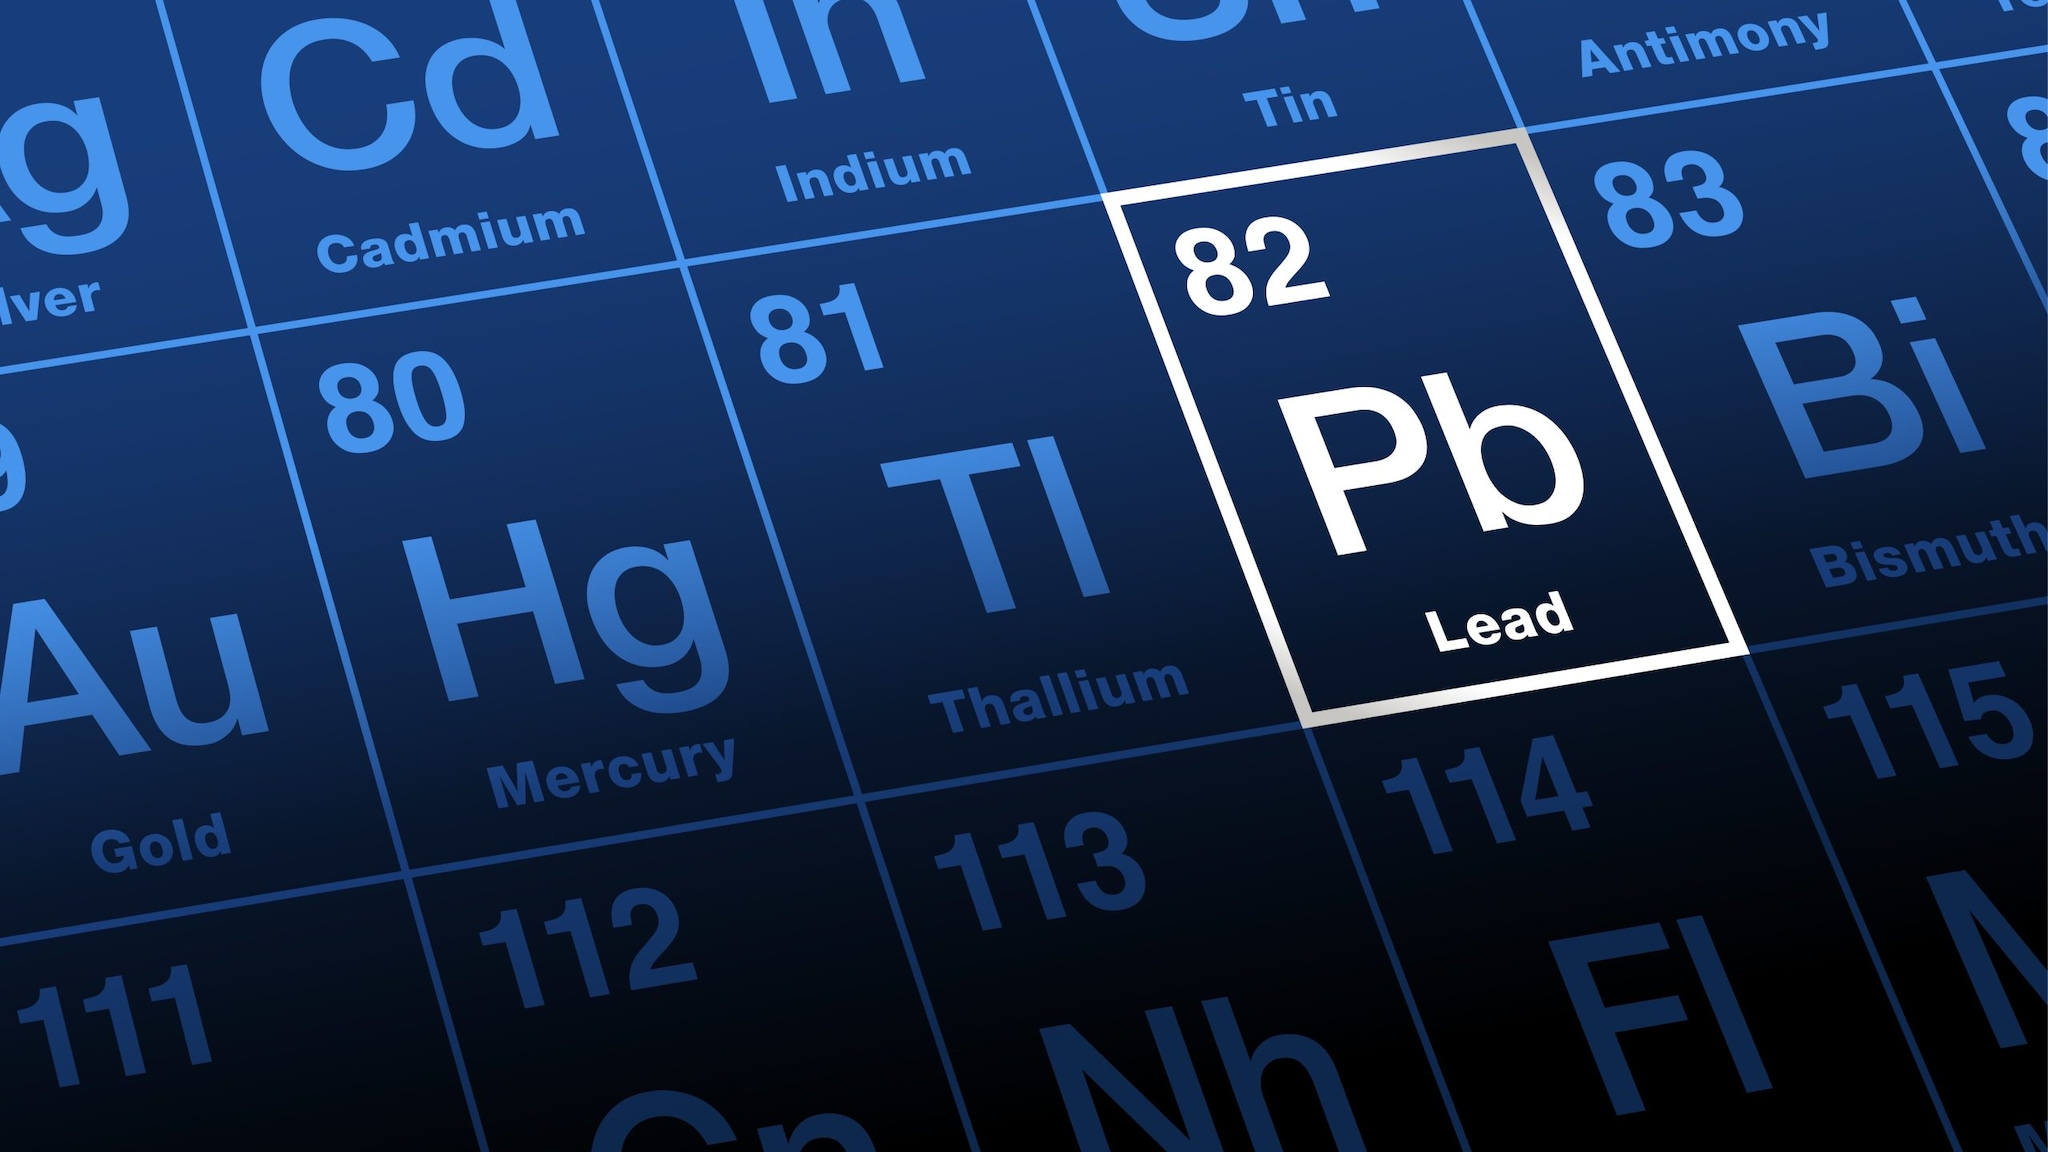 The chemical symbol for lead is Pb.